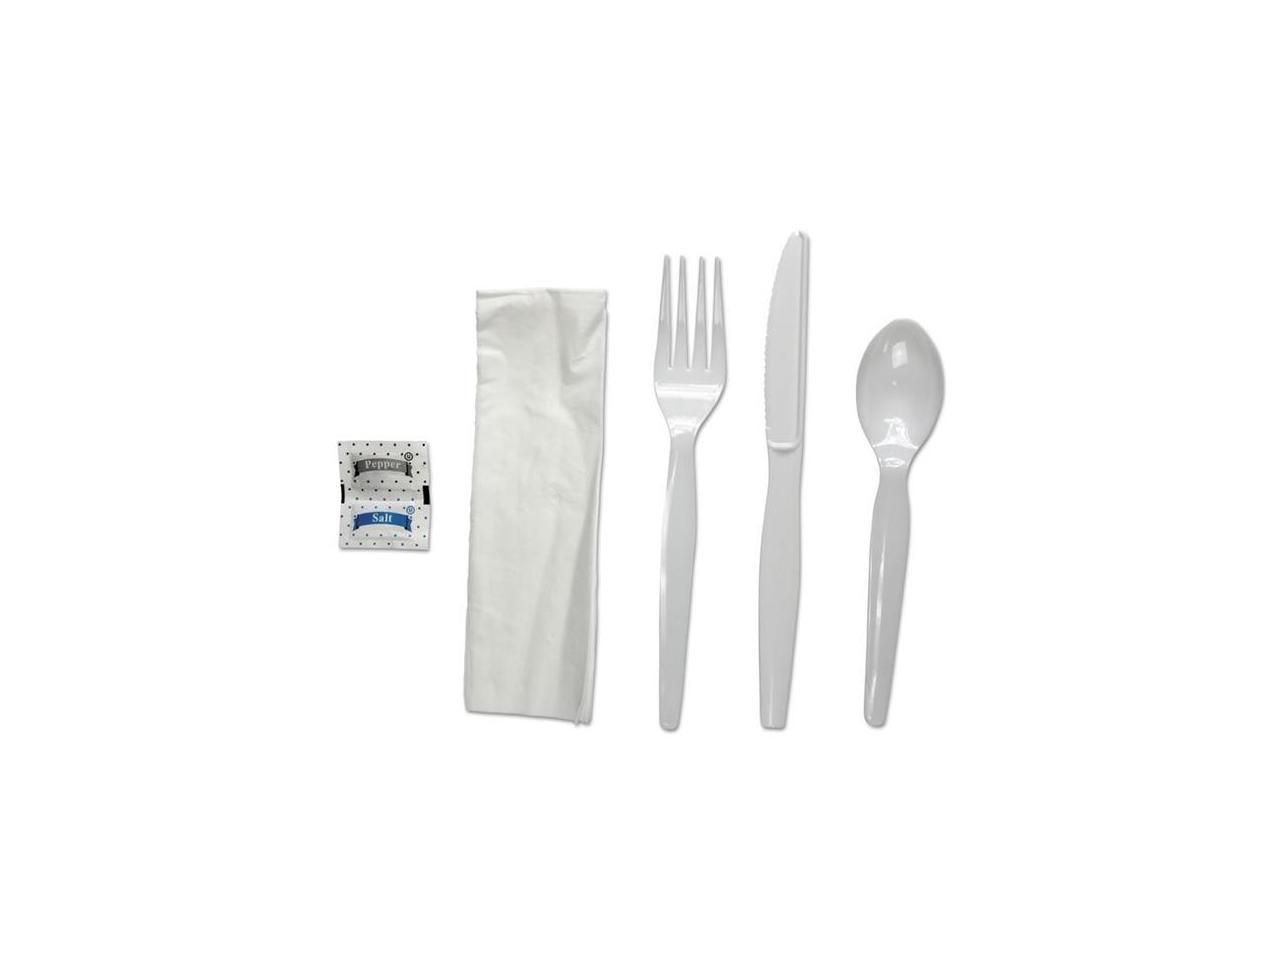 GENERAL SUPPLY Wrapped Cutlery Kit Fork/Knife/Spoon/Napkin White 250/Carton 